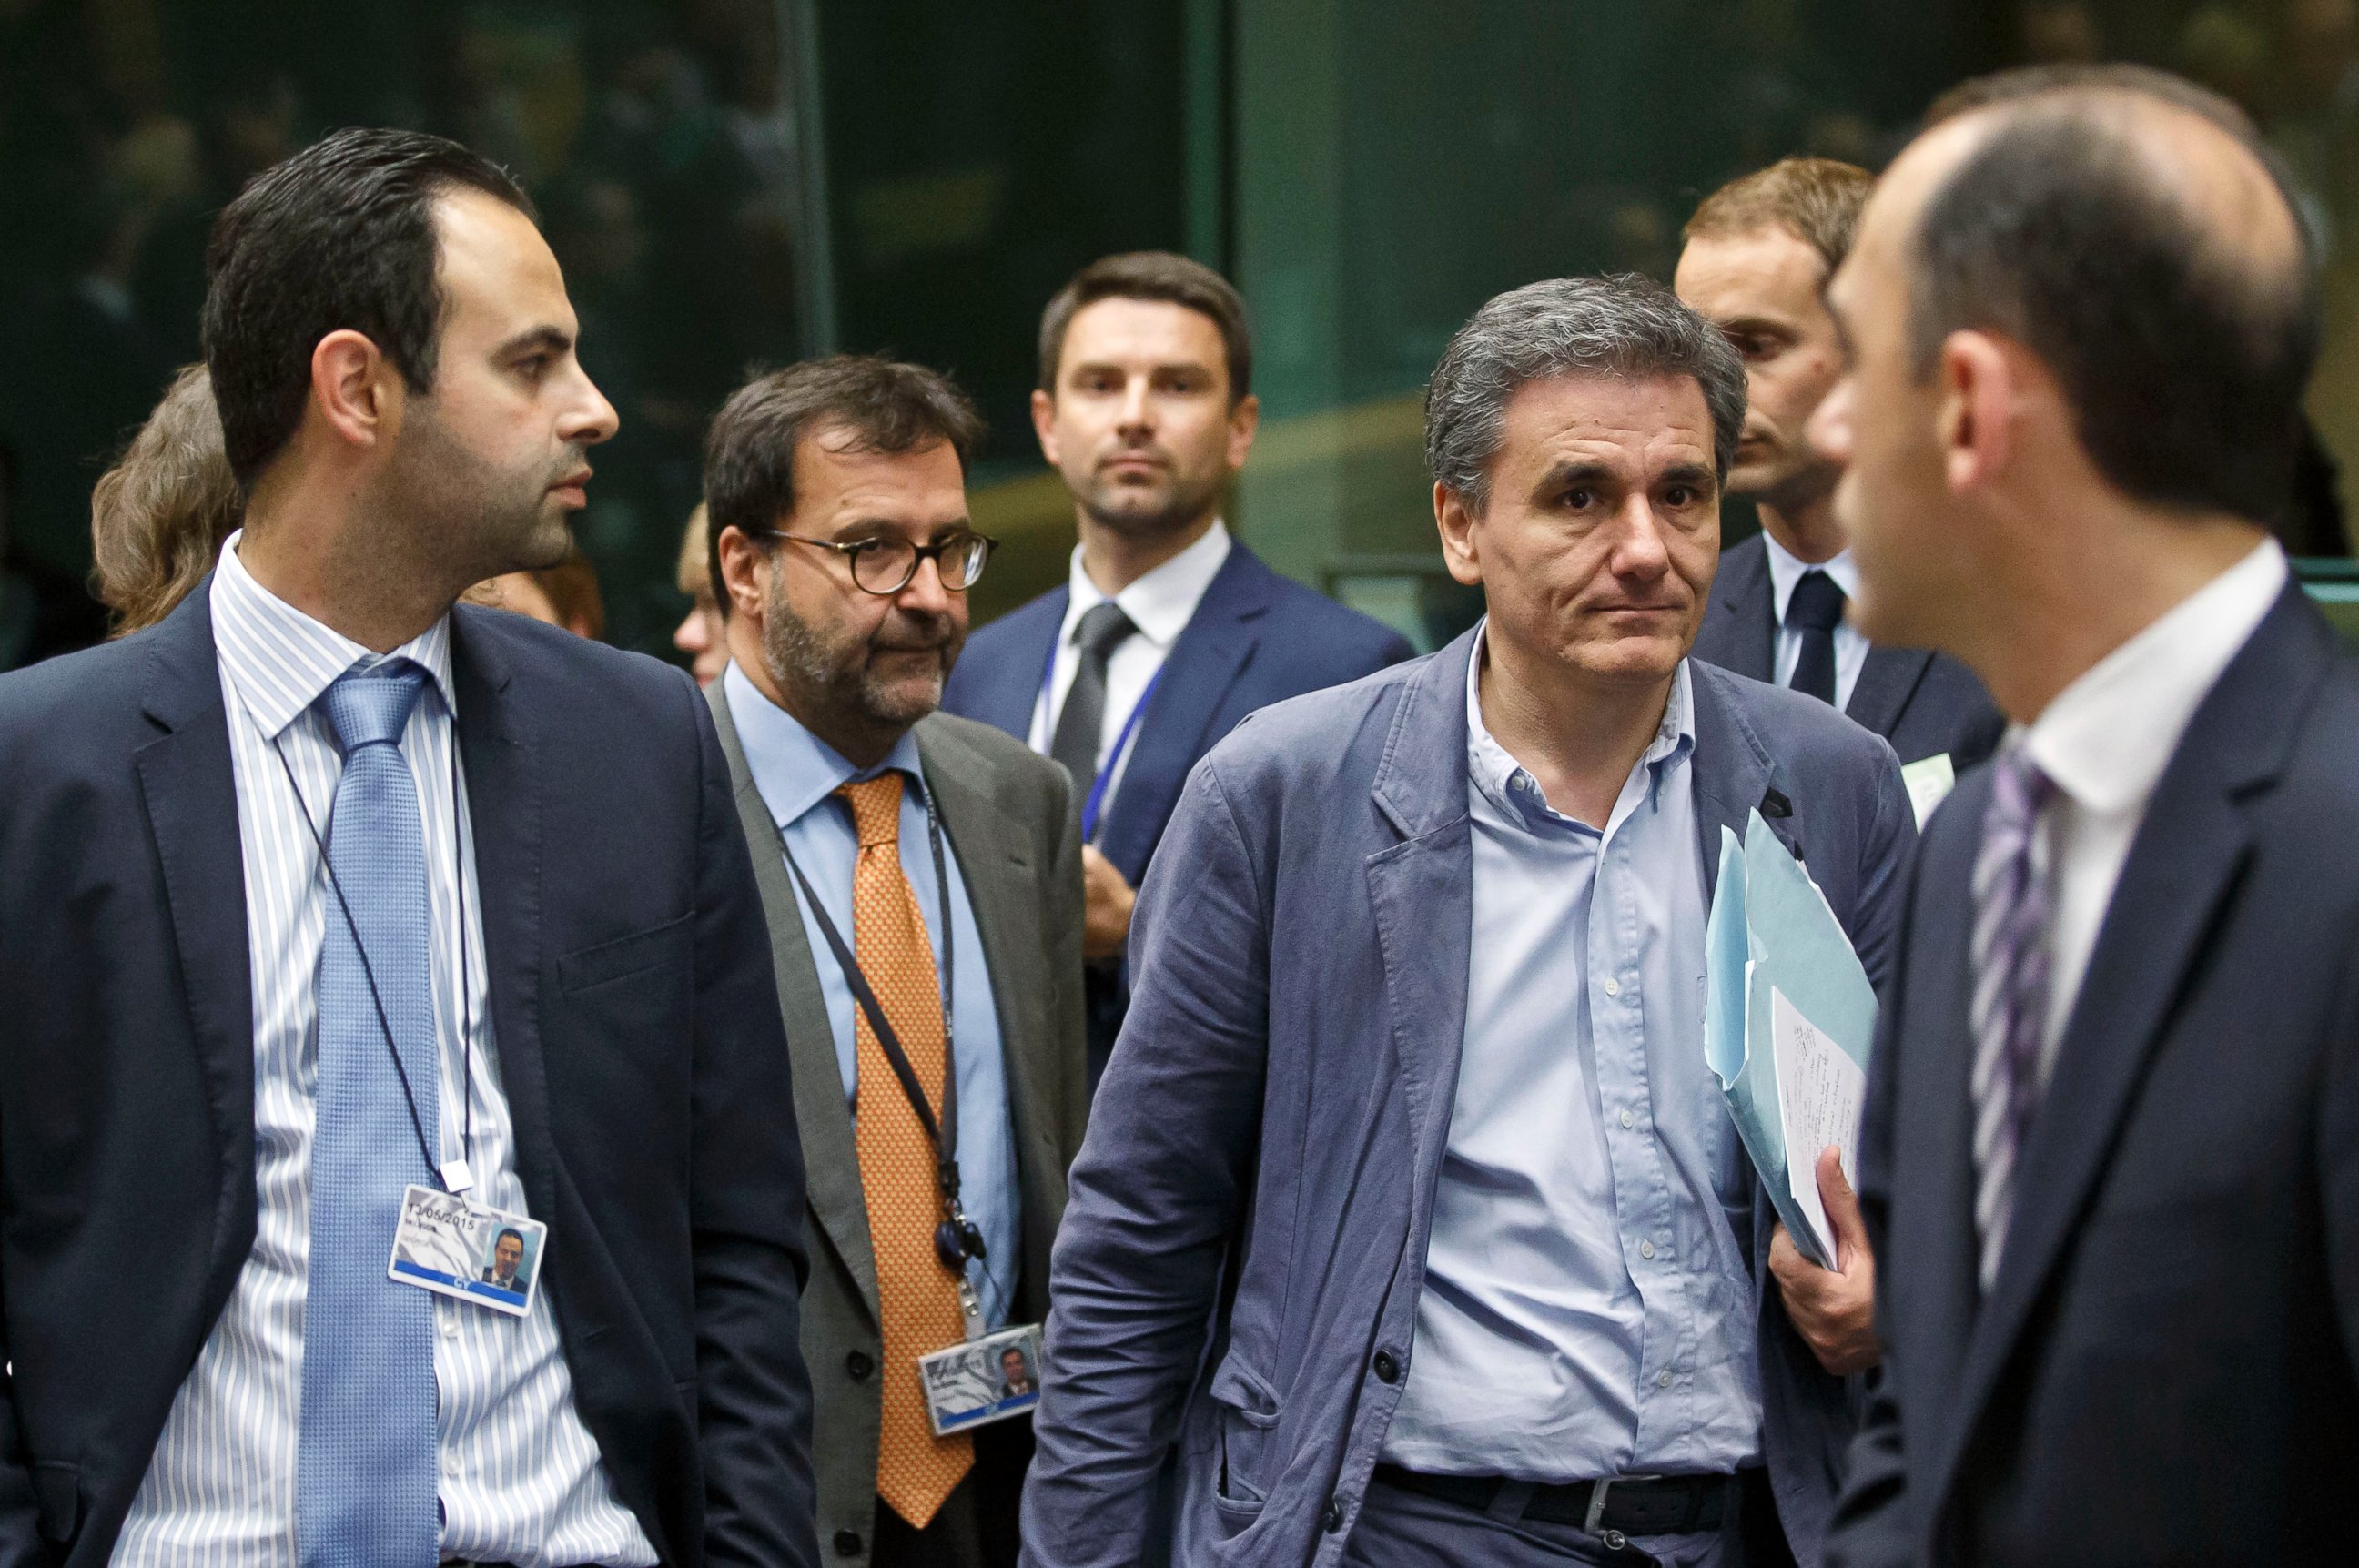 PHOTO: Greek Finance Minister Euclid Tsakalotos, third right, arrives for a round table meeting of eurozone finance ministers at the EU LEX building in Brussels on July 7, 2015.